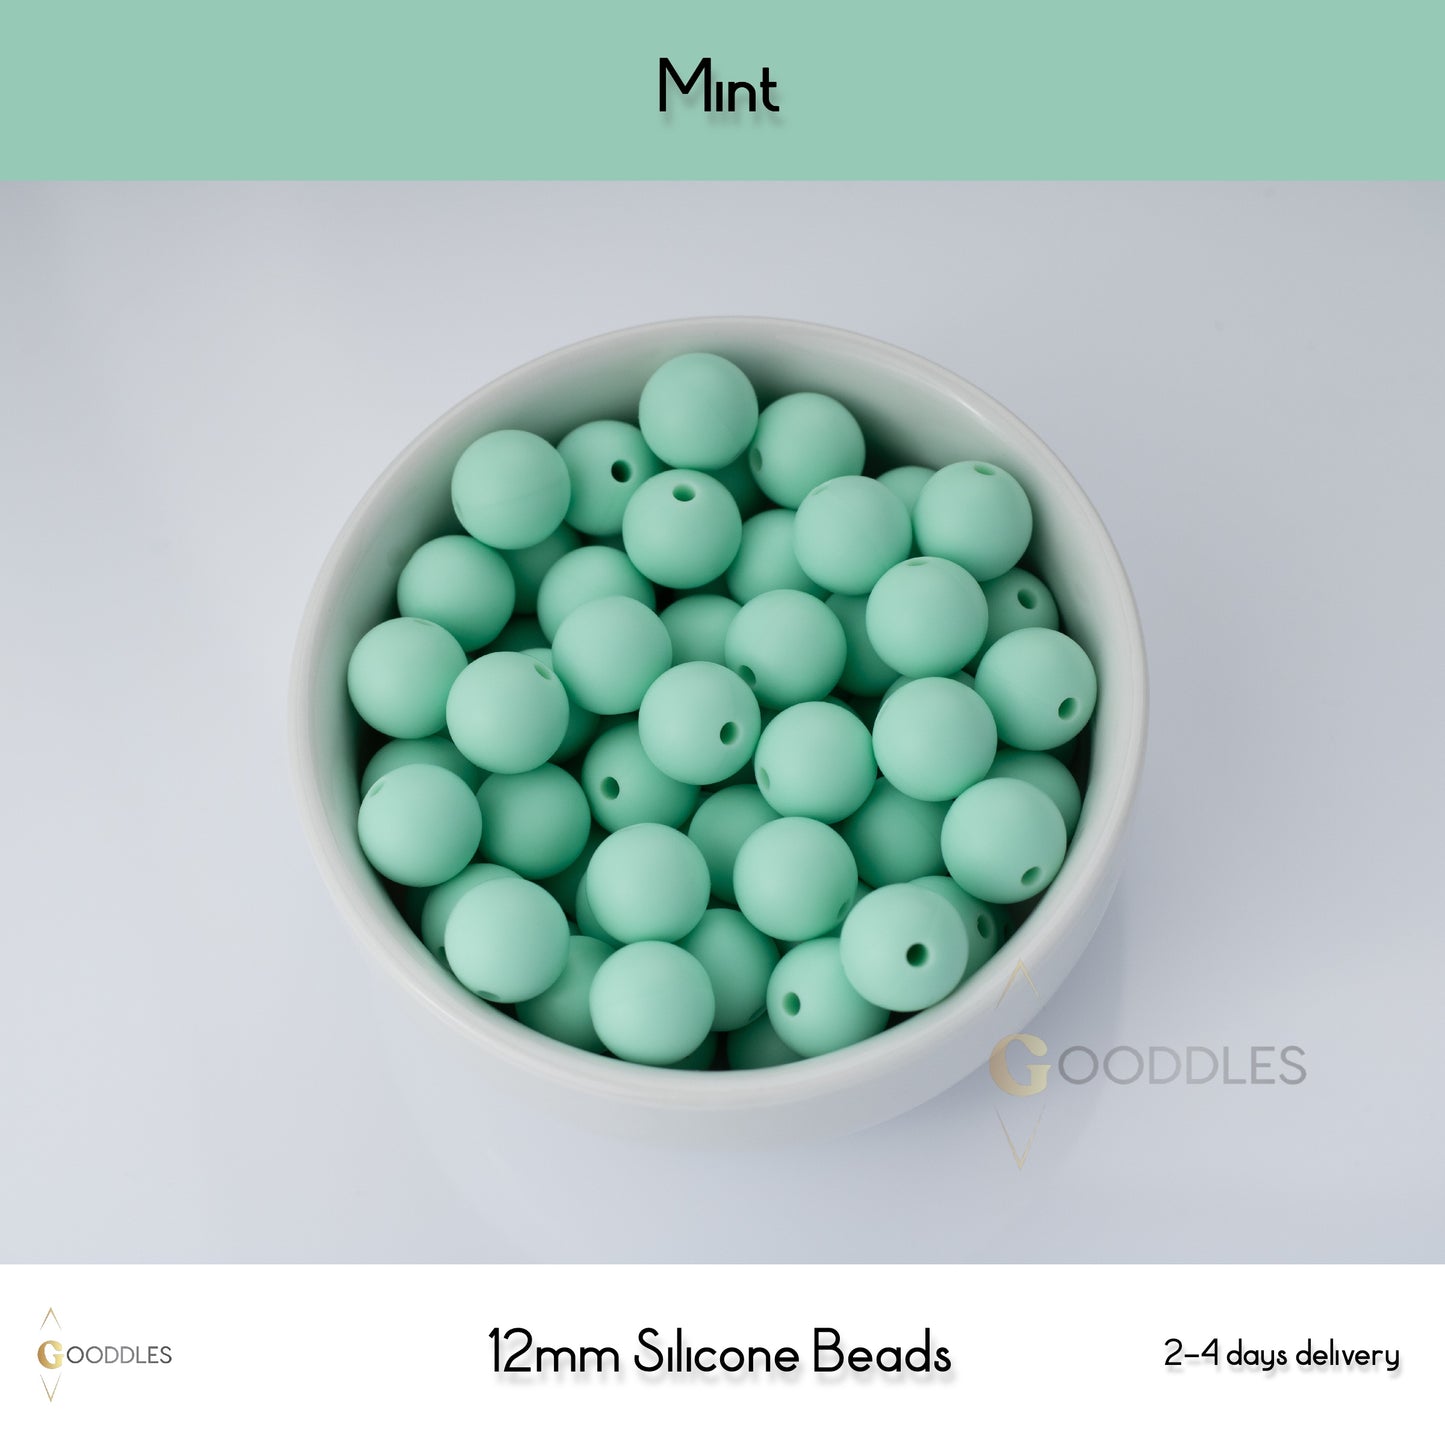 5pcs, Mint Silicone Beads Round Silicone Beads